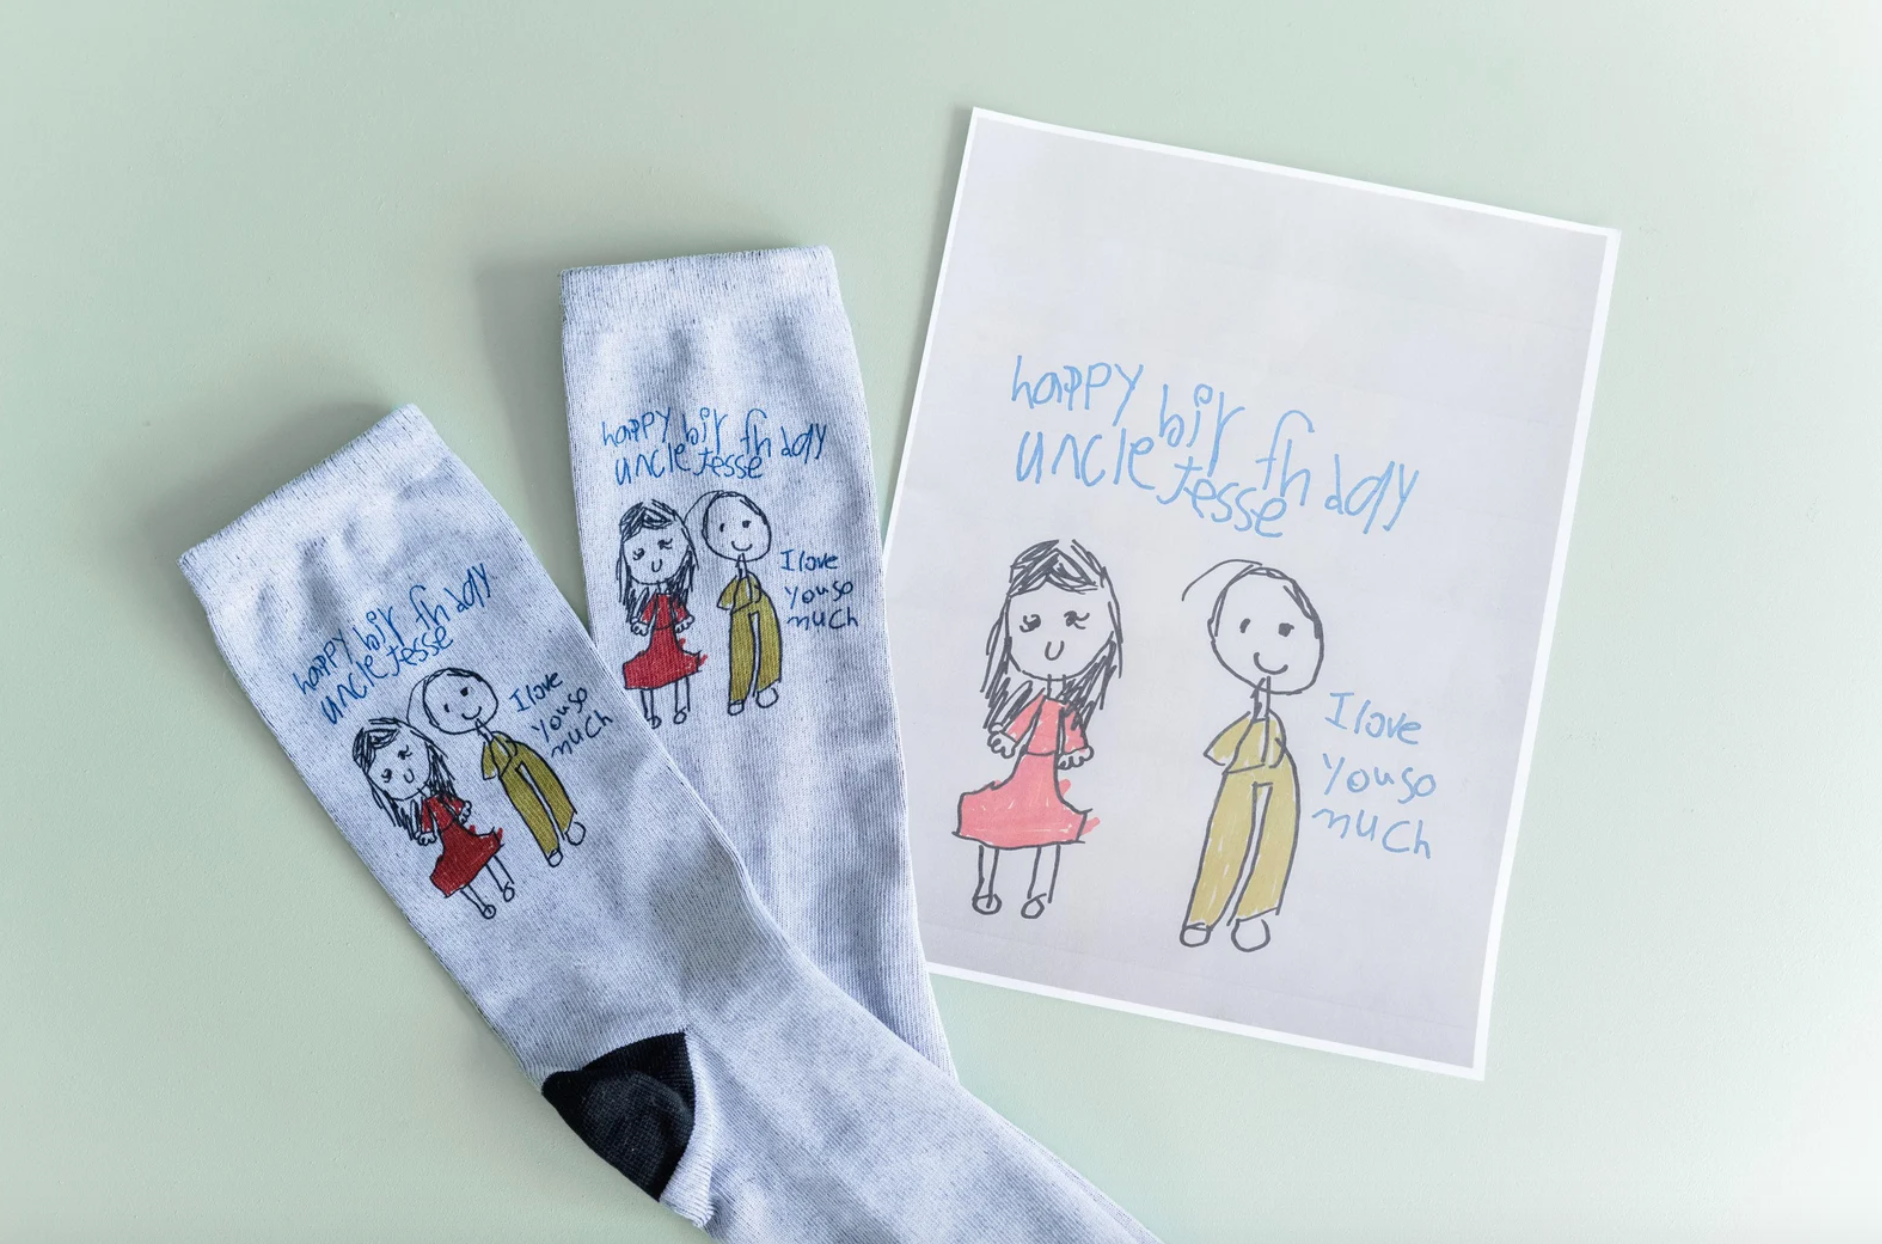 Kid's Artwork Dress Socks – Everything Done To A T